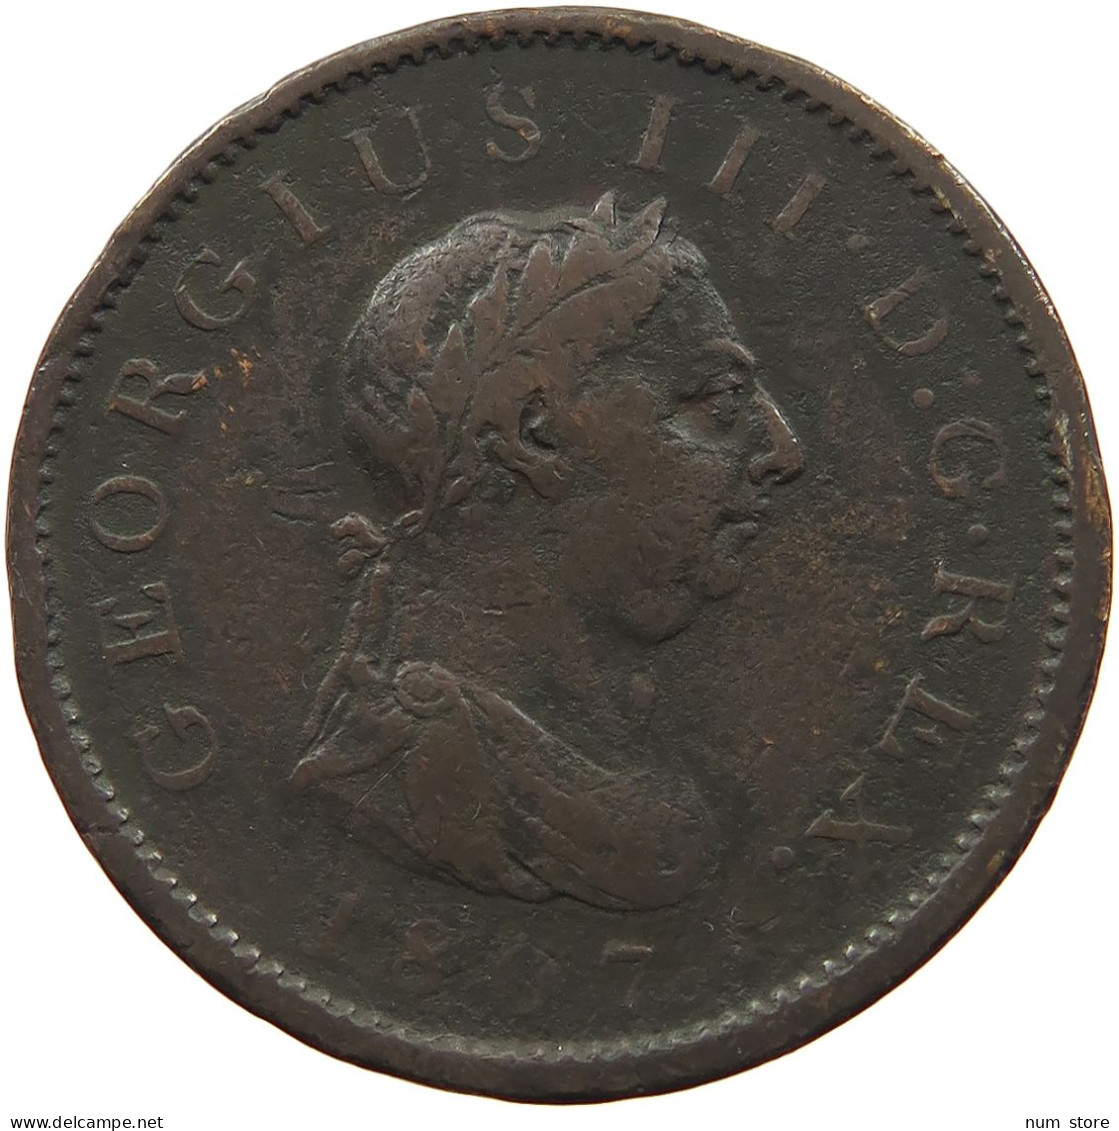 GREAT BRITAIN PENNY 1807 GEORGE III. 1760-1820. #MA 021628 - C. 1 Penny